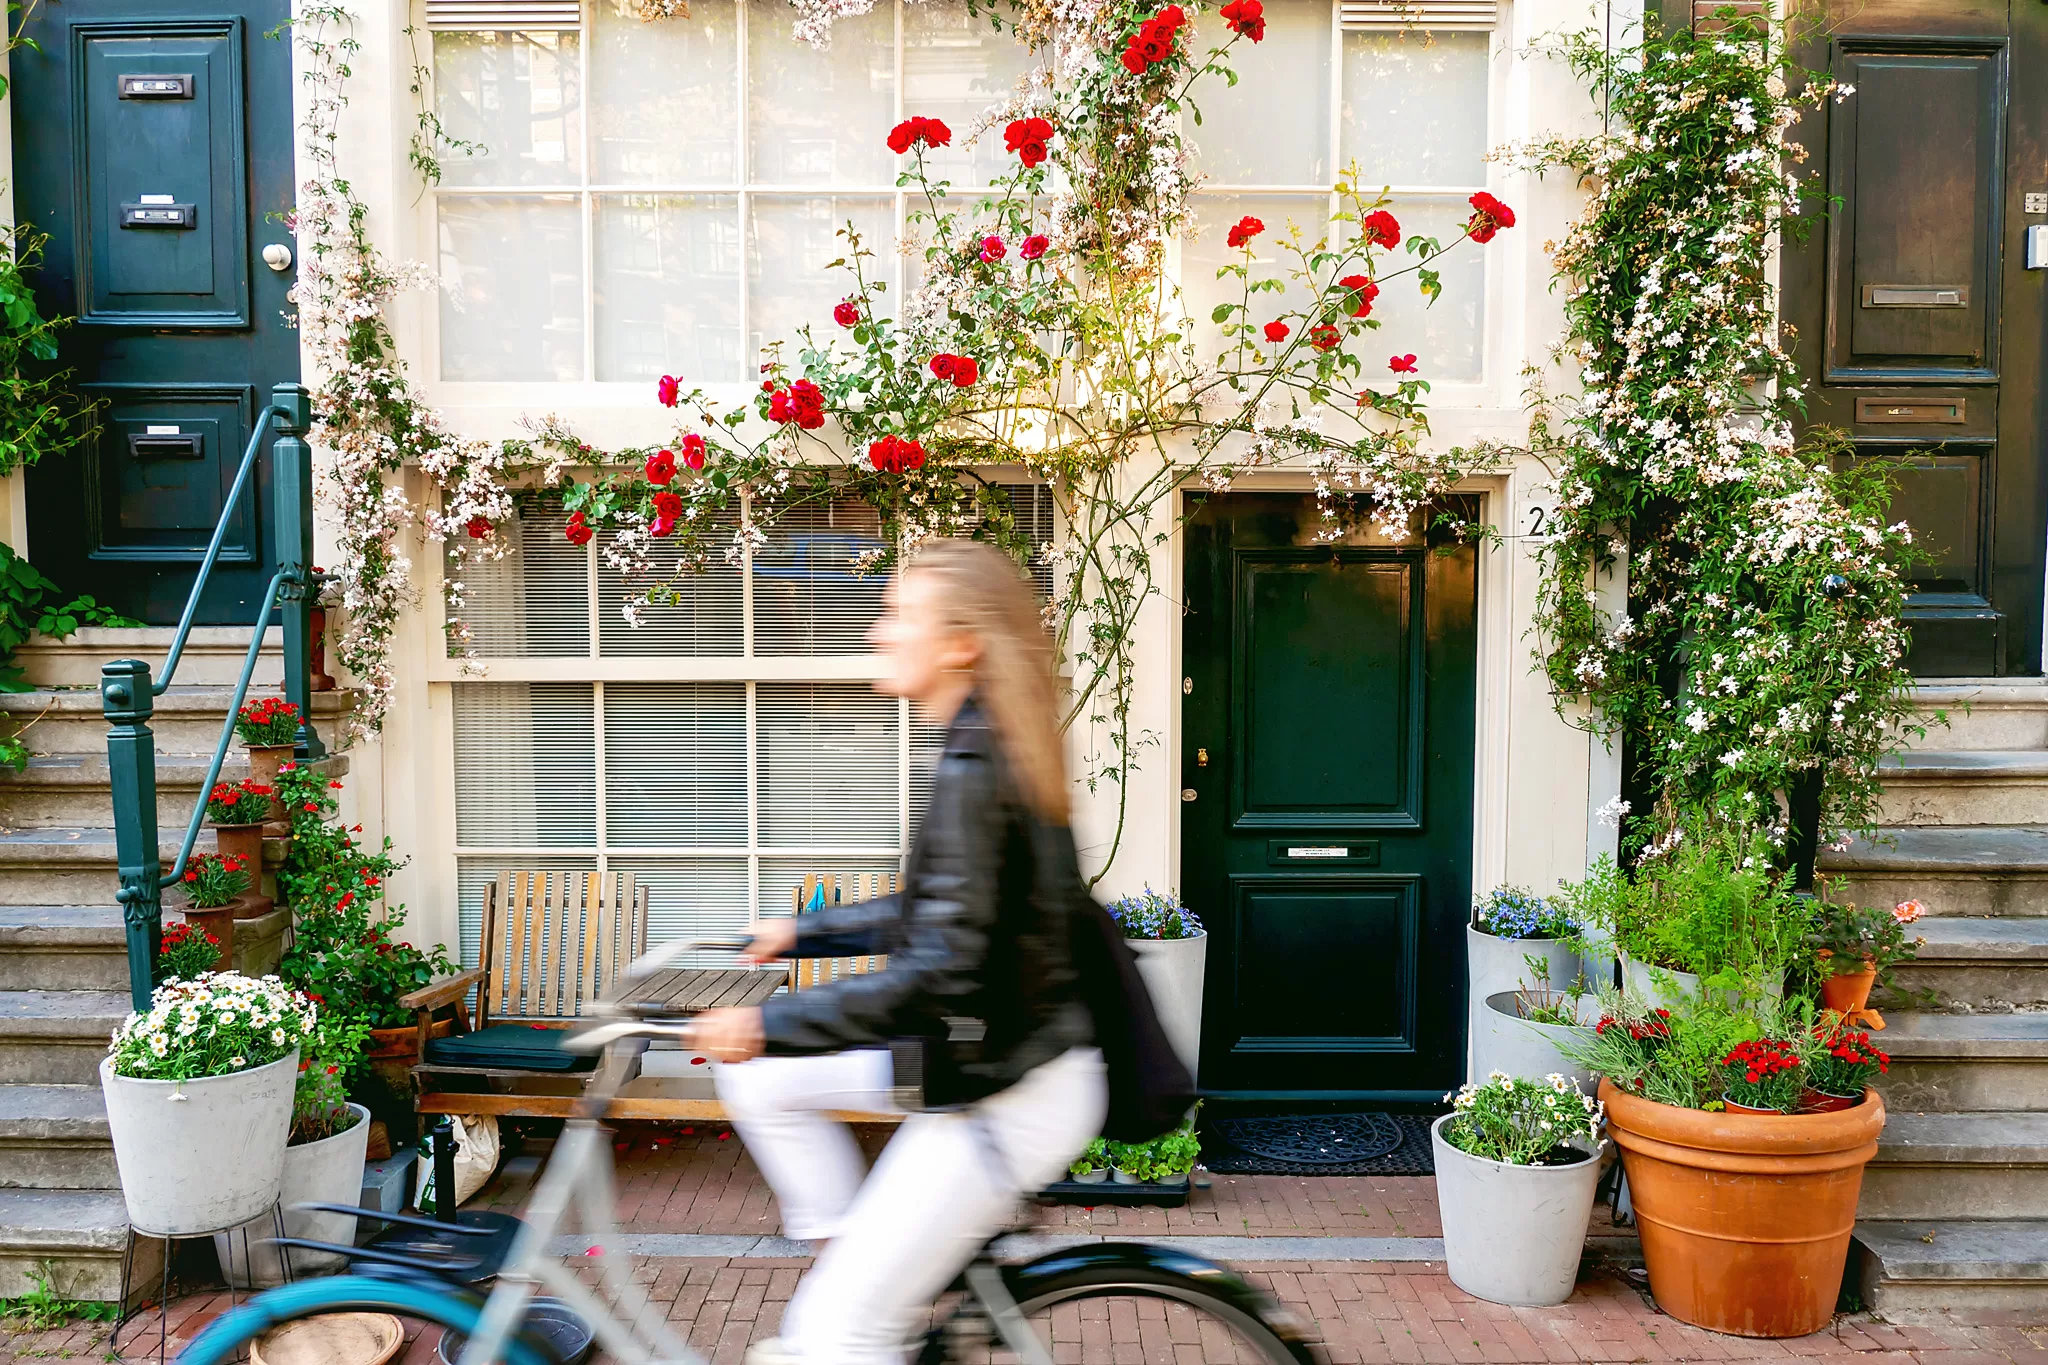 Blog post about travel necessities for Europe Trip.  This image was taken in Amsterdam and shows a building with beautiful flowers on and around it.  A woman was riding by on her bike at the same time the photo was taken and is passing by in a blur. 